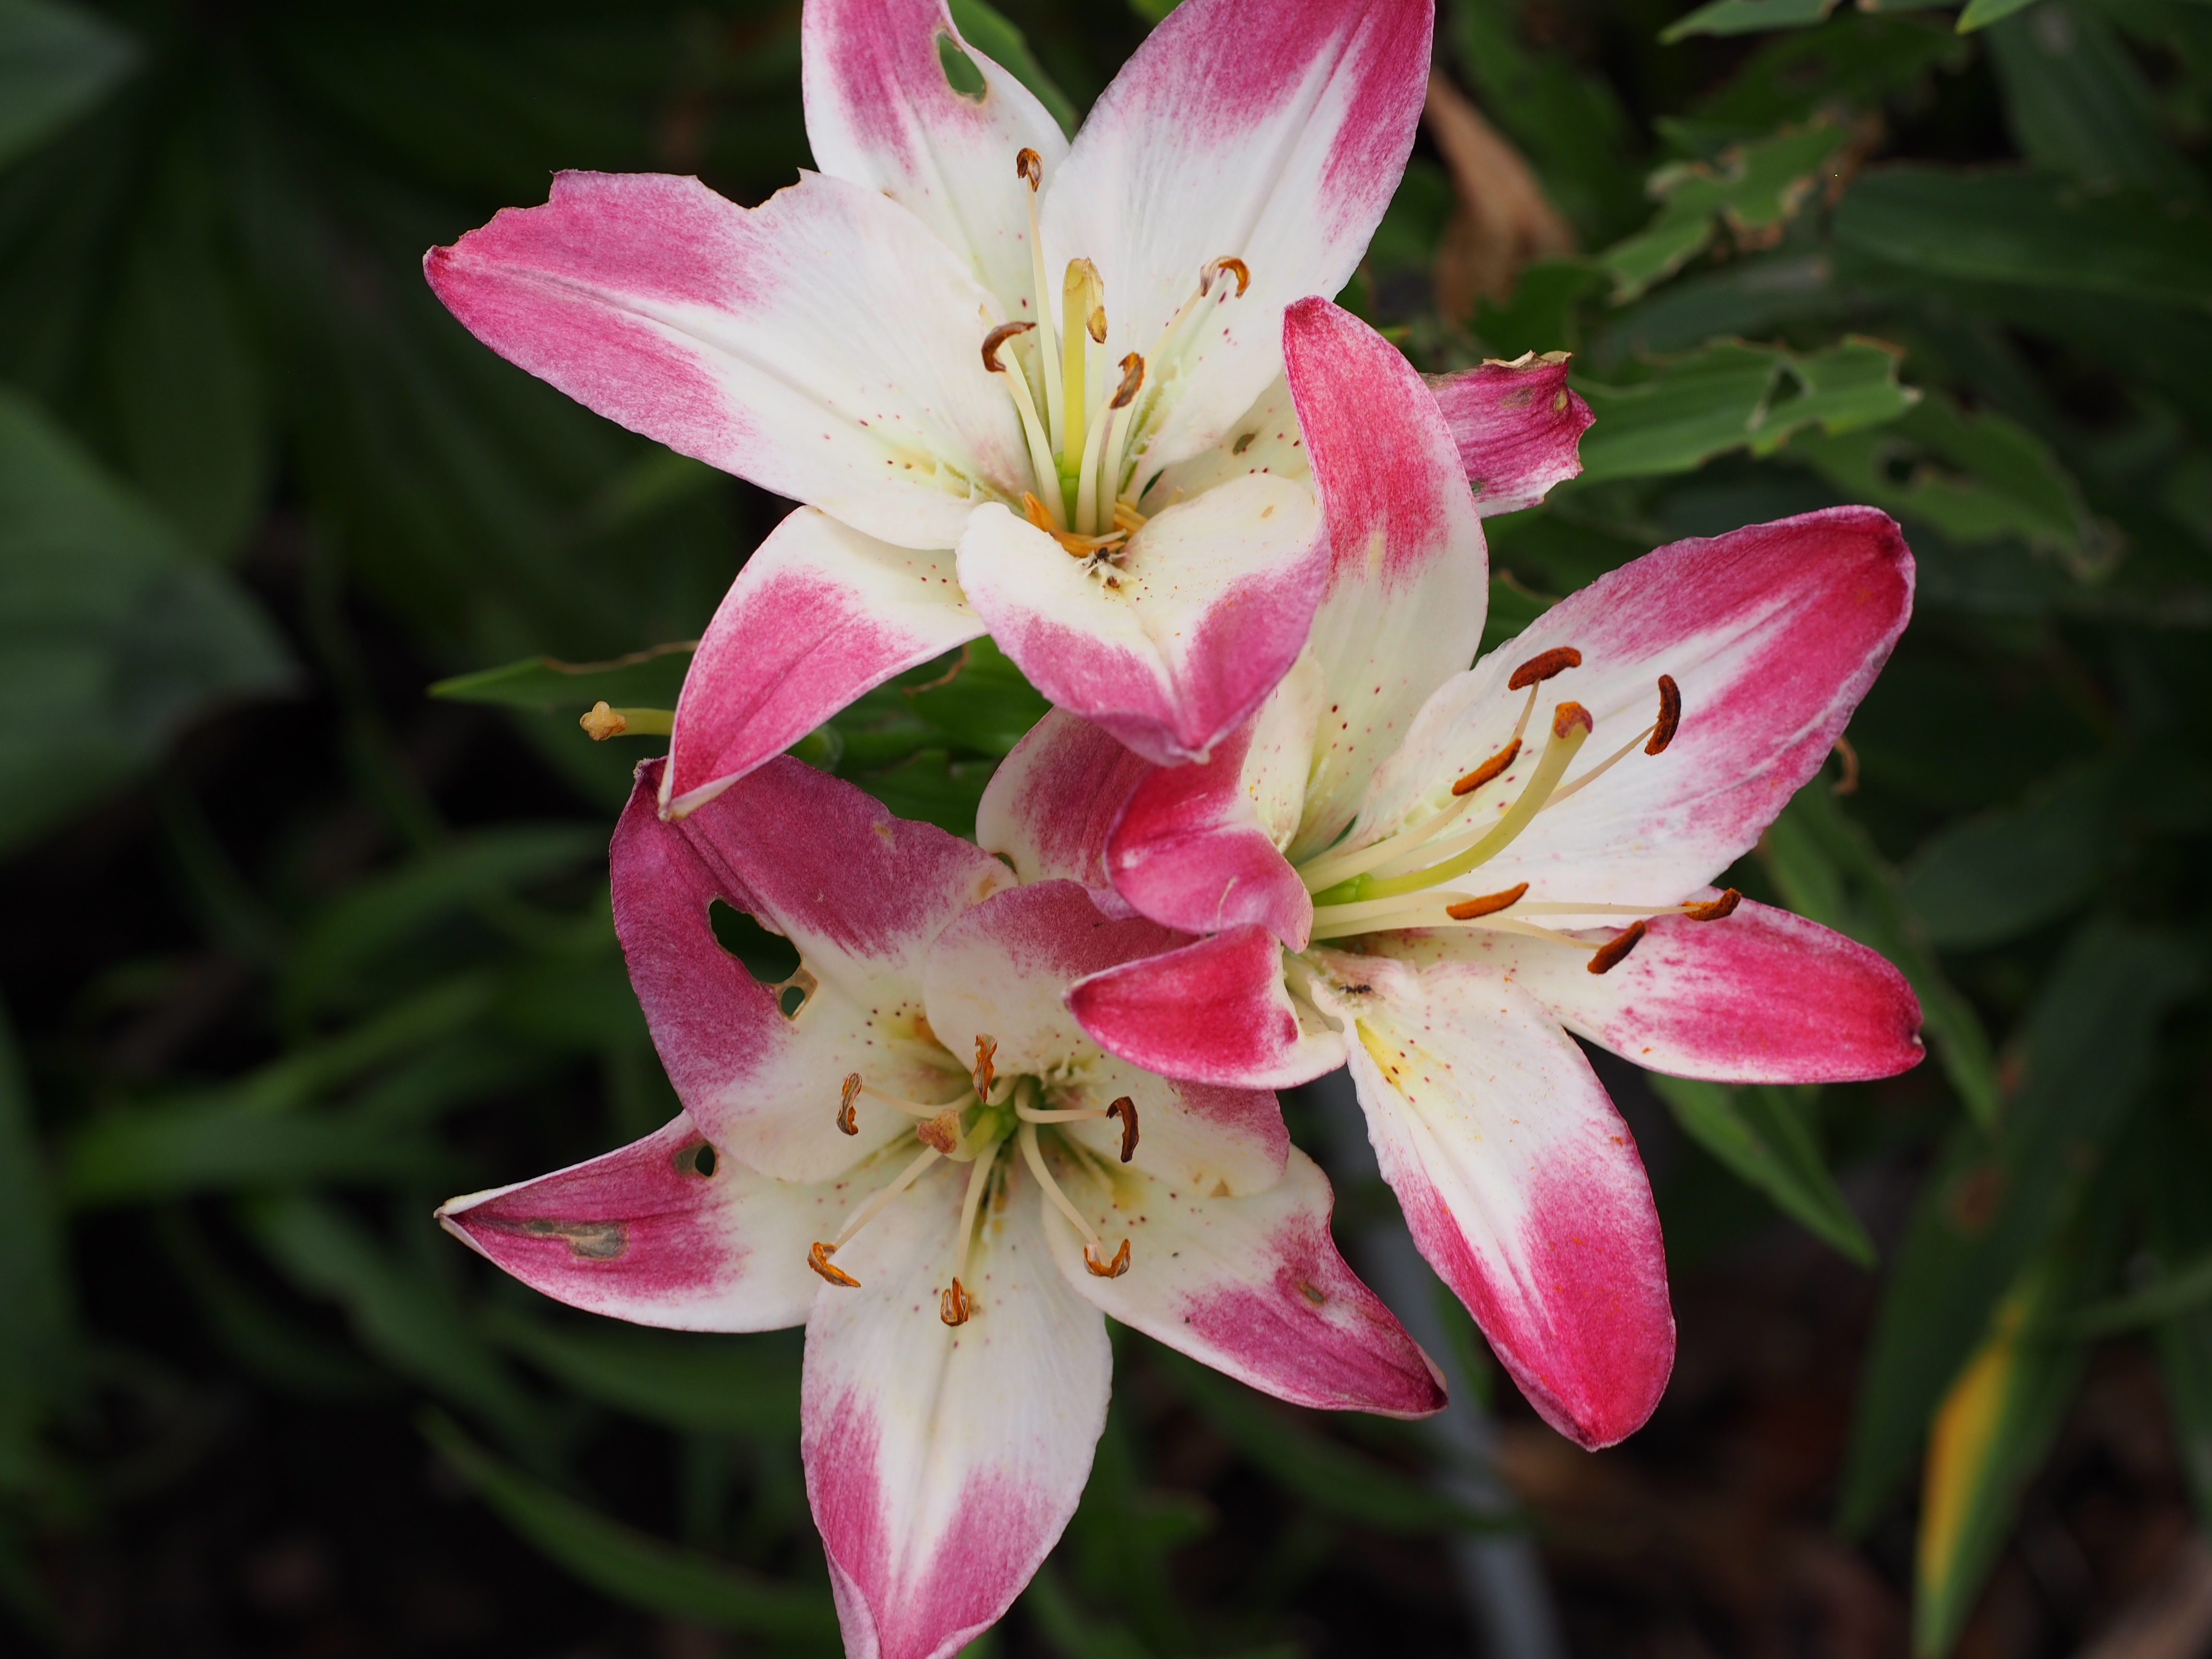 File:Lilium 'Lollypop' 6 2021 Asiatic Hybrid Lily- (51273789895 